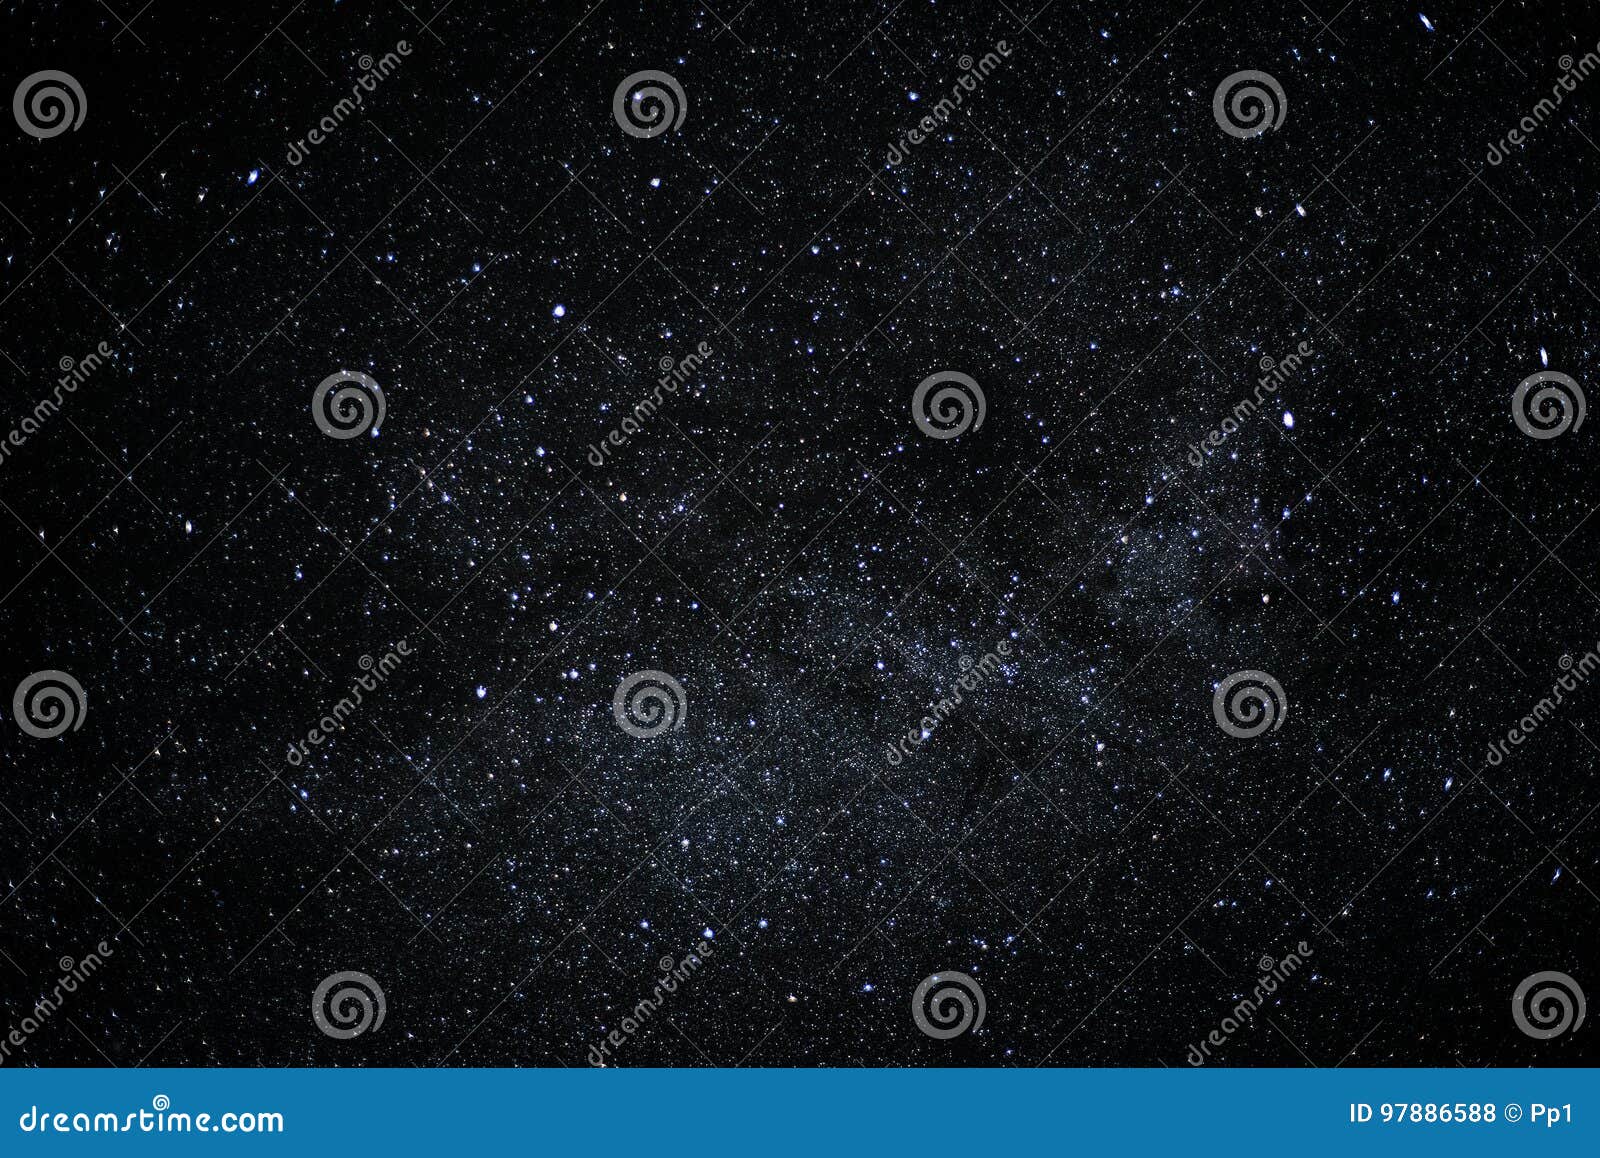 night sky full of stars, cloudless background